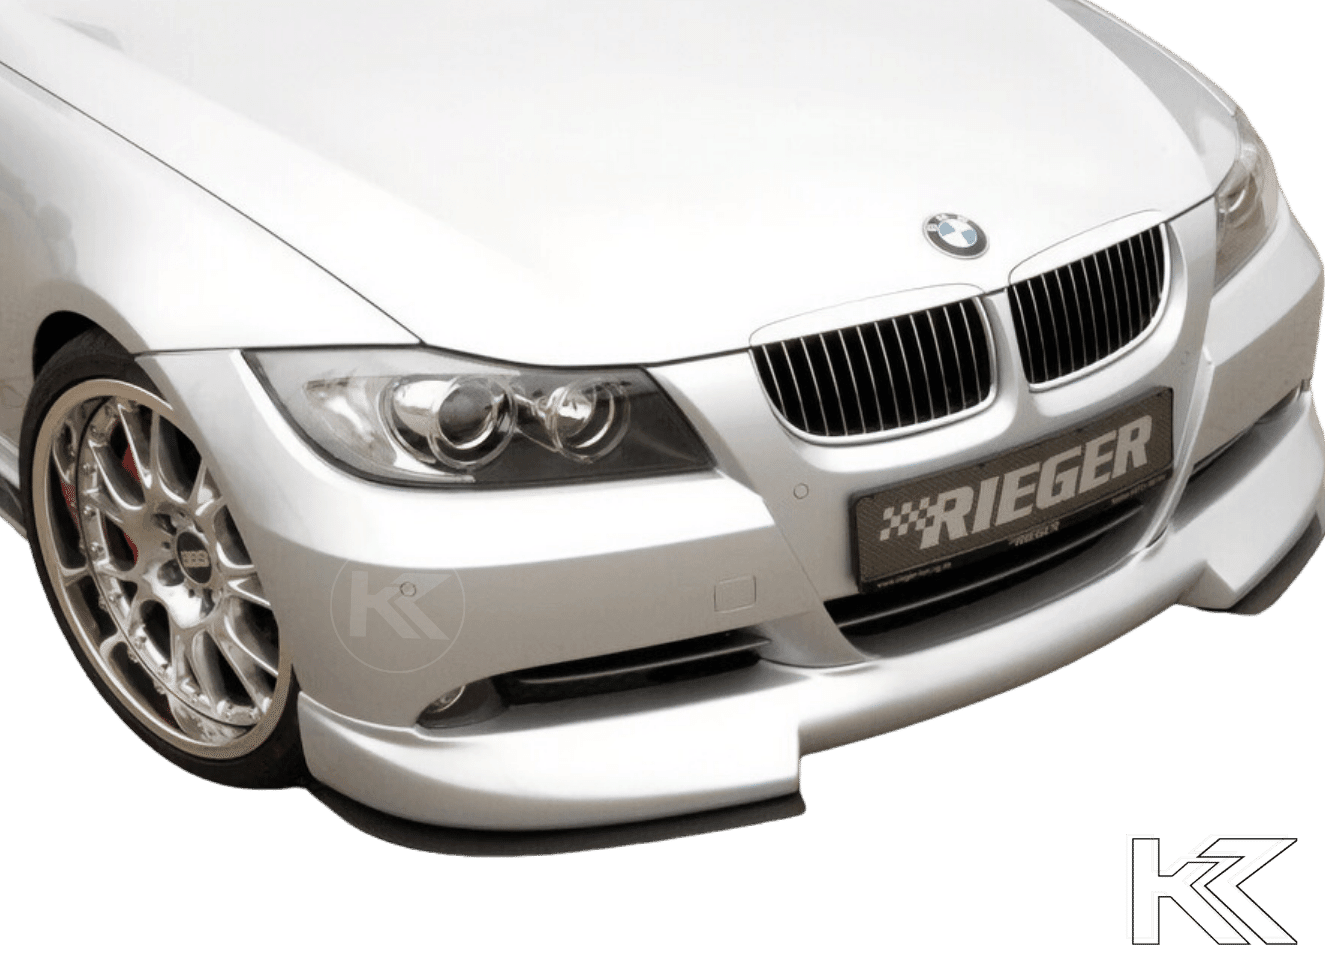 Rieger BMW E90/91 Front Splitter for Rieger Front Lip 53400 - K2 Industries